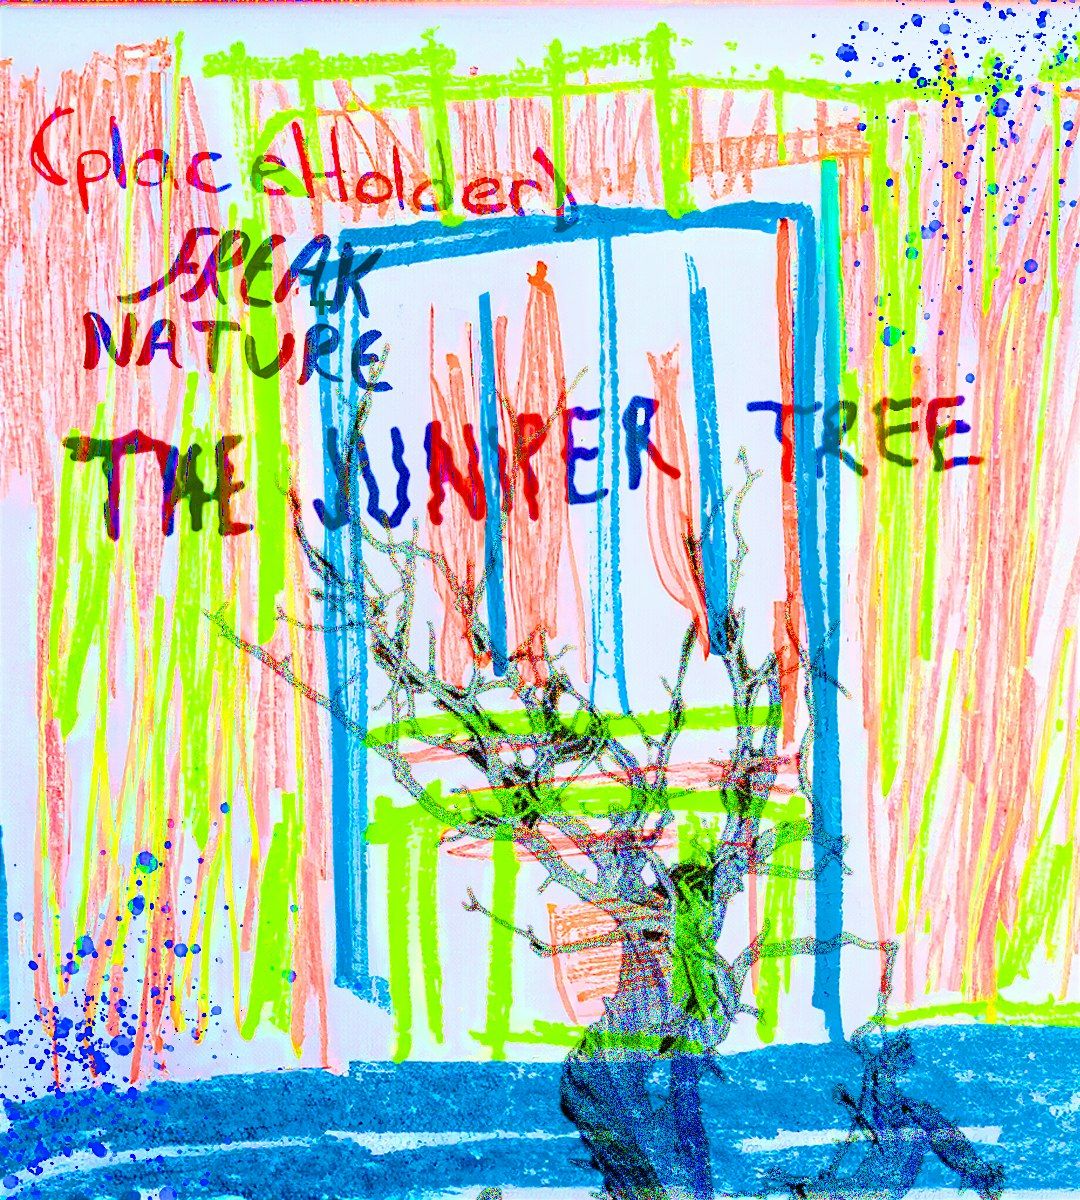 The Juniper Tree, by Freak Nature & (placeHolder)